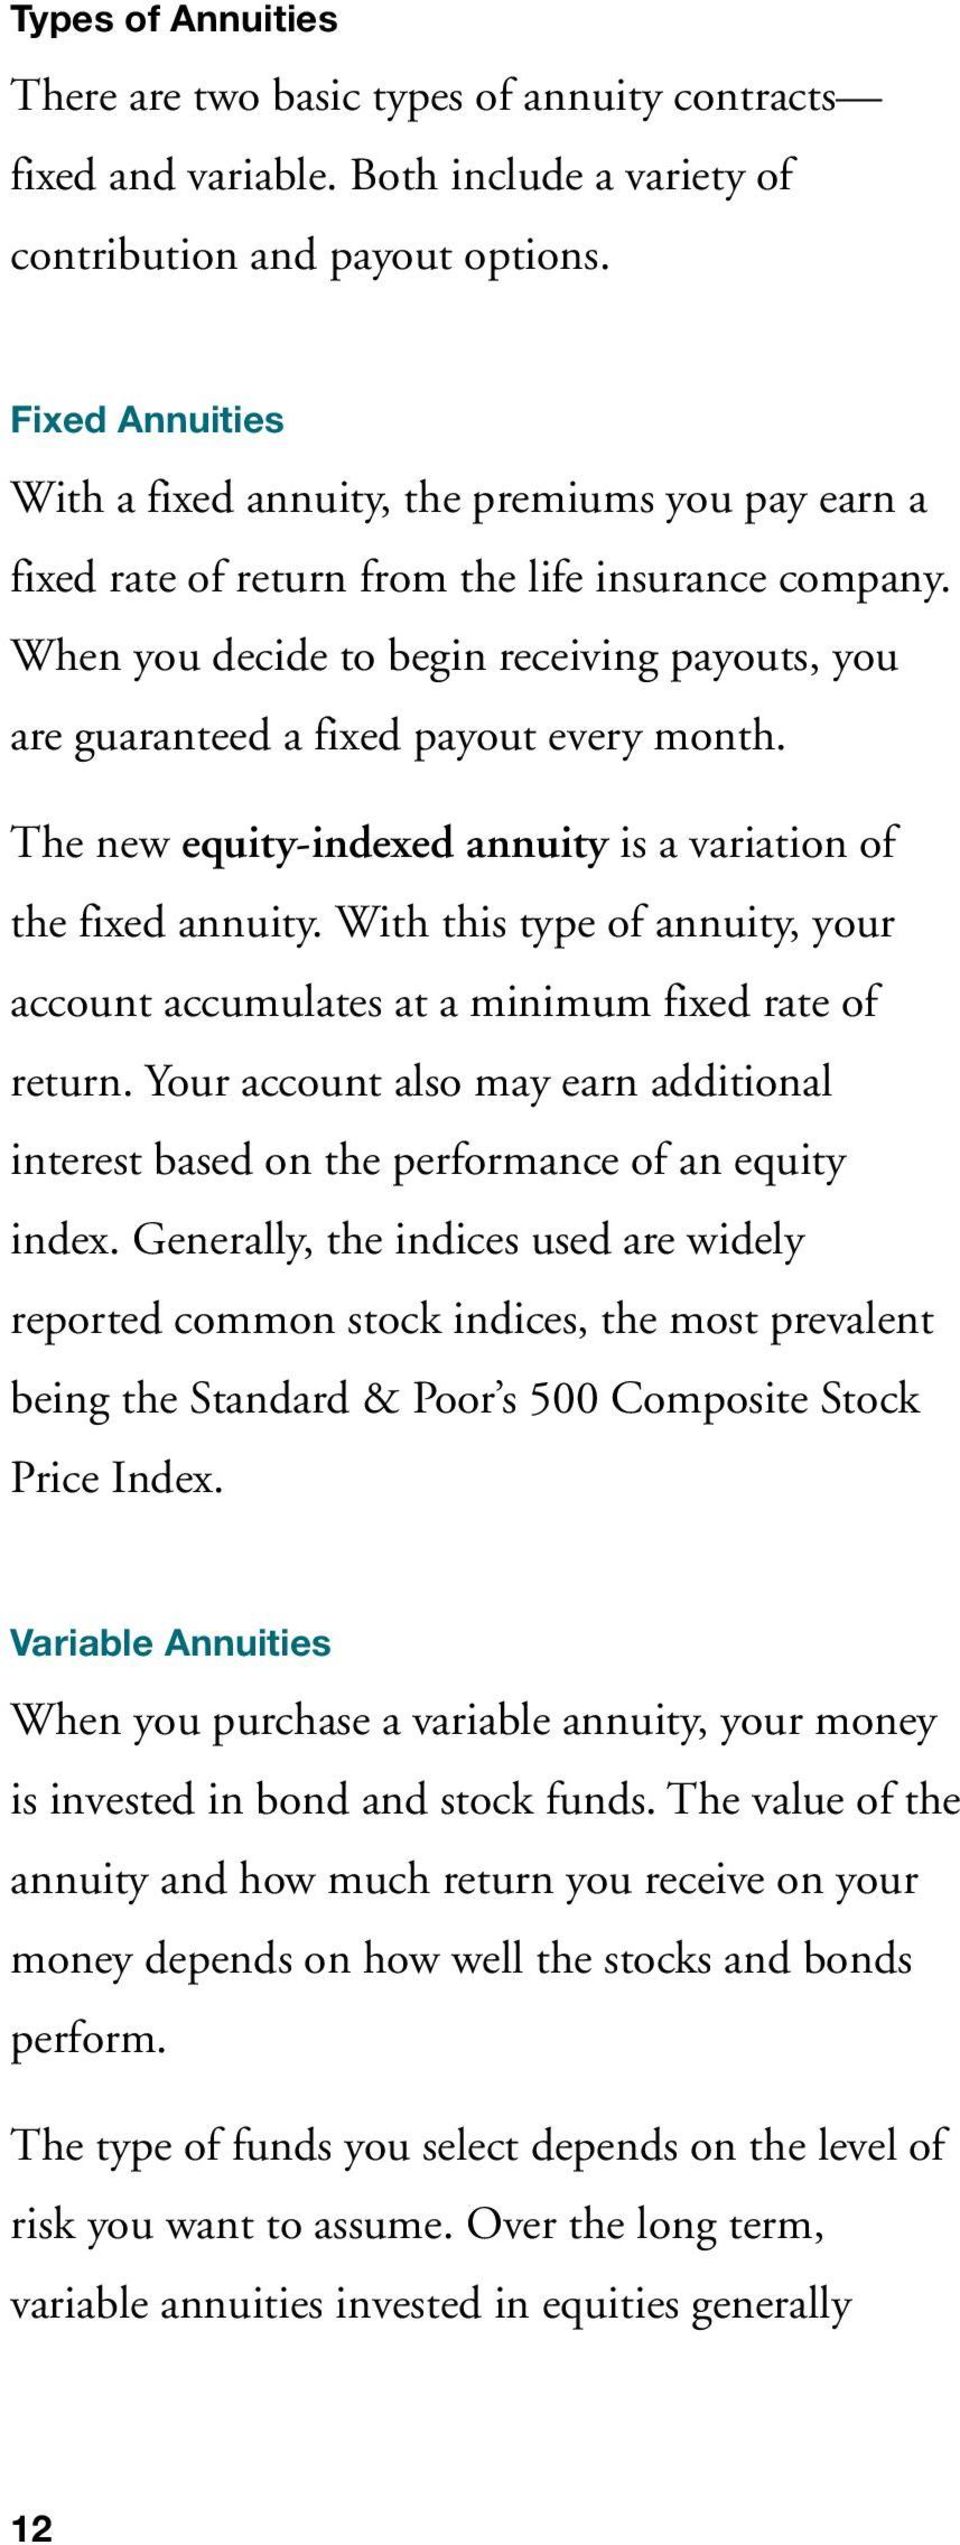 When you decide to begin receiving payouts, you are guaranteed a fixed payout every month. The new equity-indexed annuity is a variation of the fixed annuity.